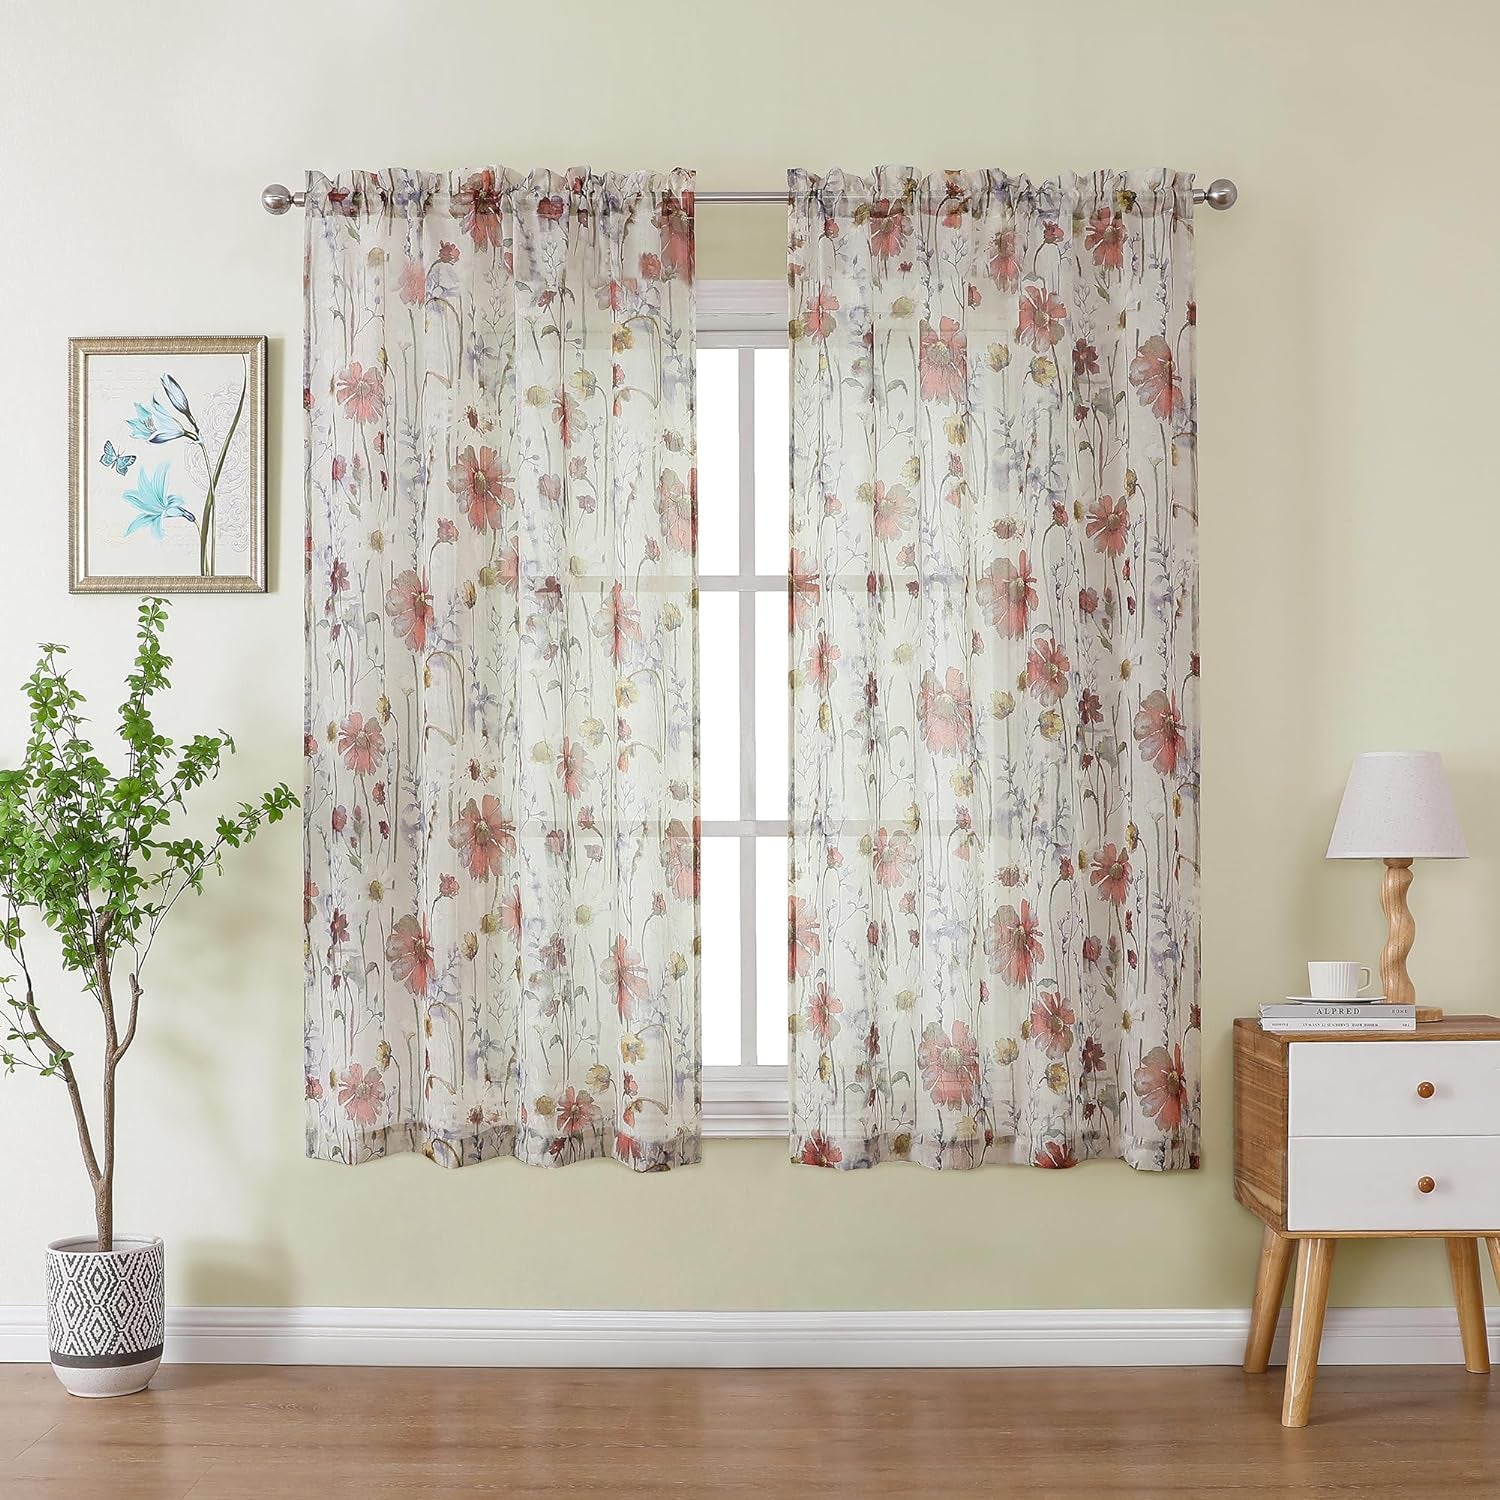 OWENIE Crushed Semi Sheer Curtains 72 Inches Length 2 Panels, Floral Pattern Design Rod Pocket Light Filtering Farmhouse Curtains for Bedroom Living Room, 2 Pieces Total 84 Inch Wide, 72 Inch Long  OWENIE Multi Color 42"Wx54"L | 2Pcs 